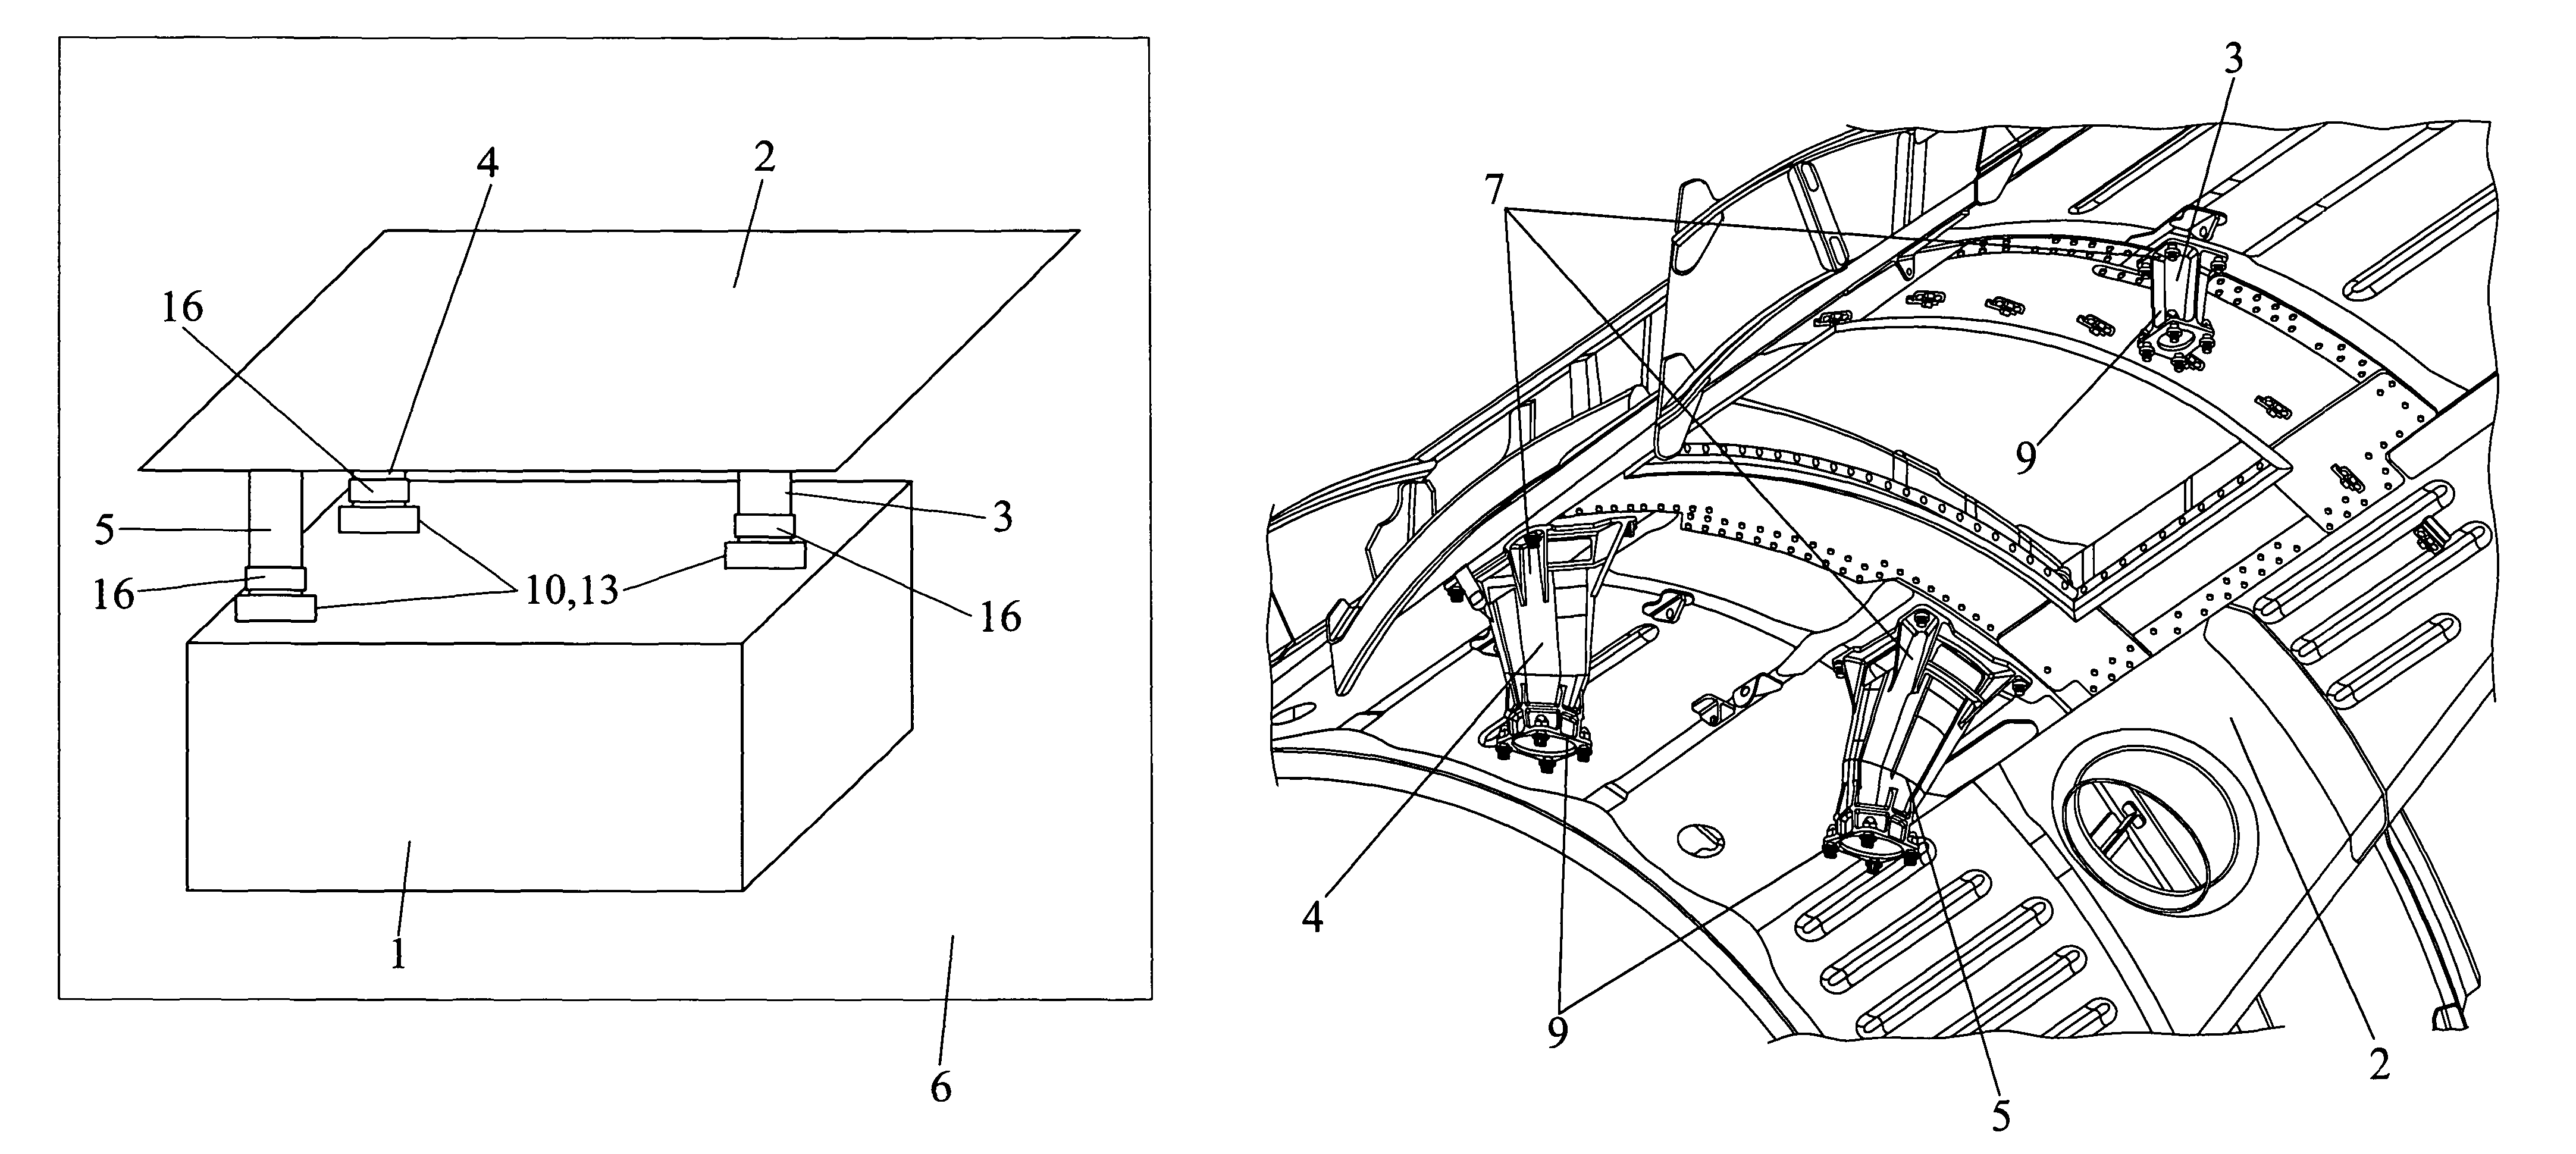 Support system for auxiliary power unit